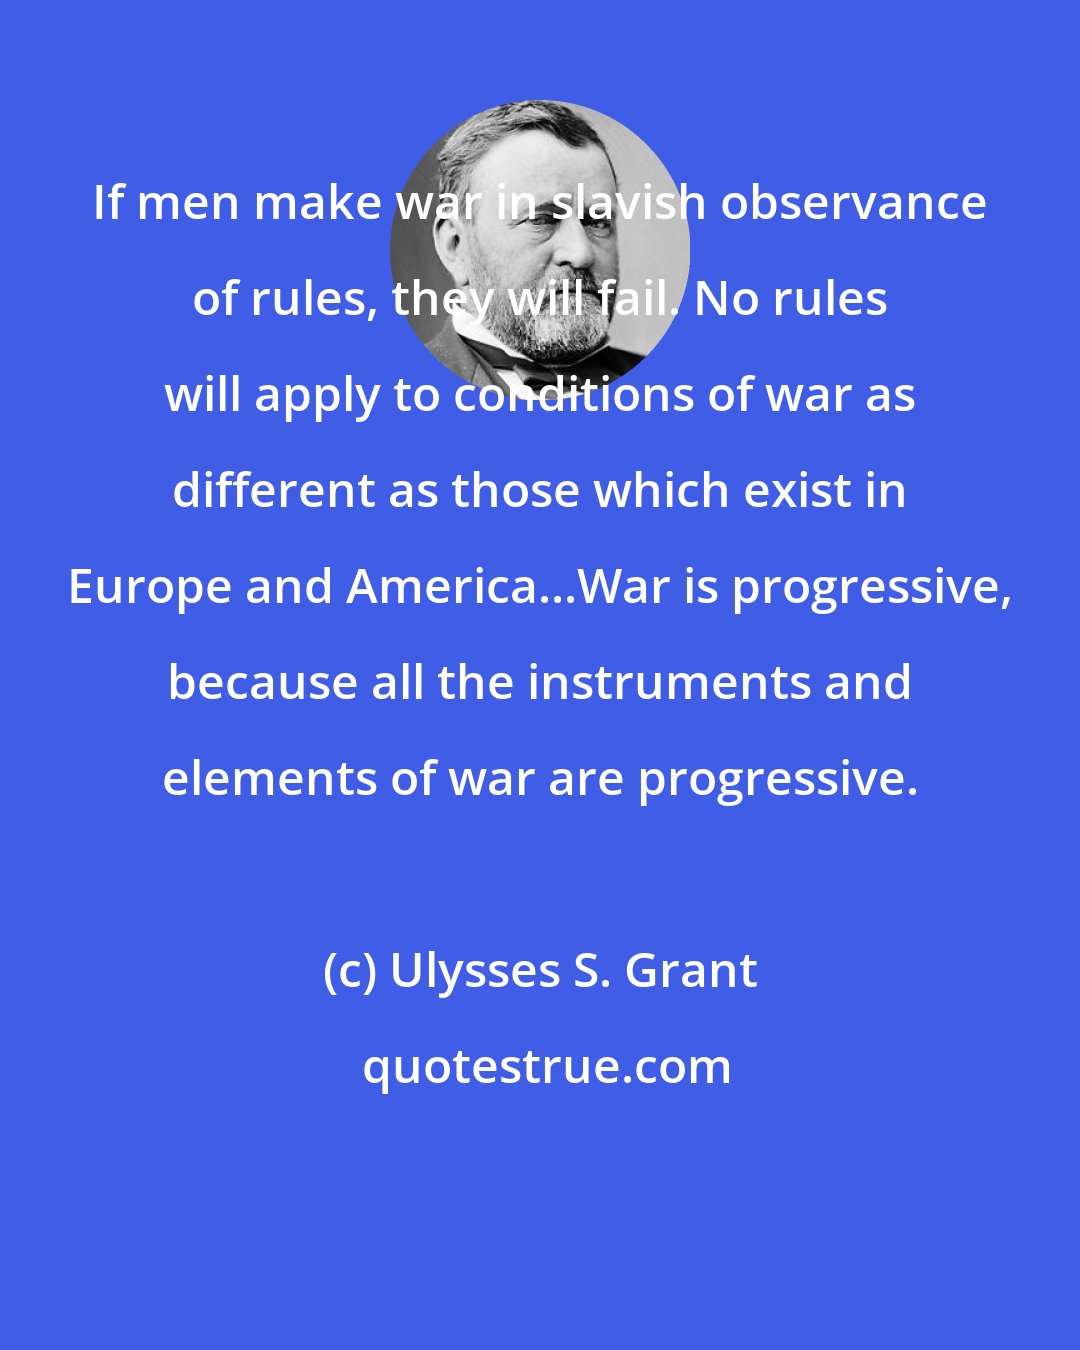 Ulysses S. Grant: If men make war in slavish observance of rules, they will fail. No rules will apply to conditions of war as different as those which exist in Europe and America...War is progressive, because all the instruments and elements of war are progressive.